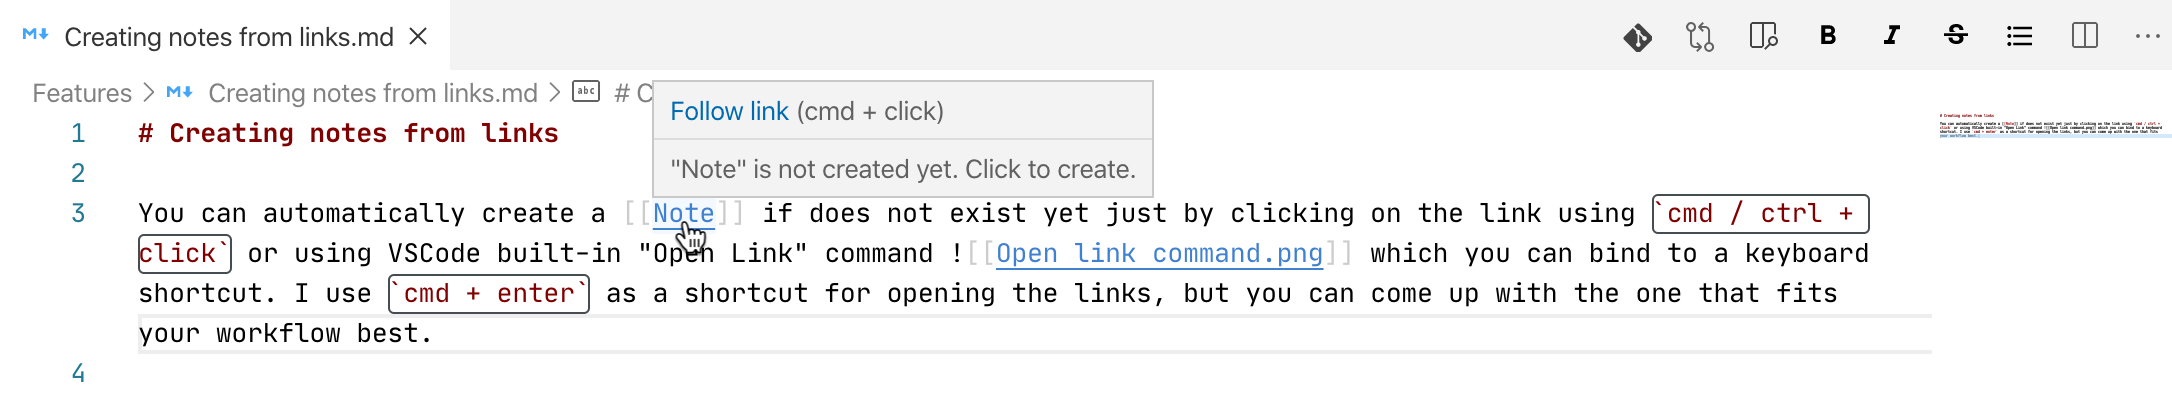 Creating notes from links.png